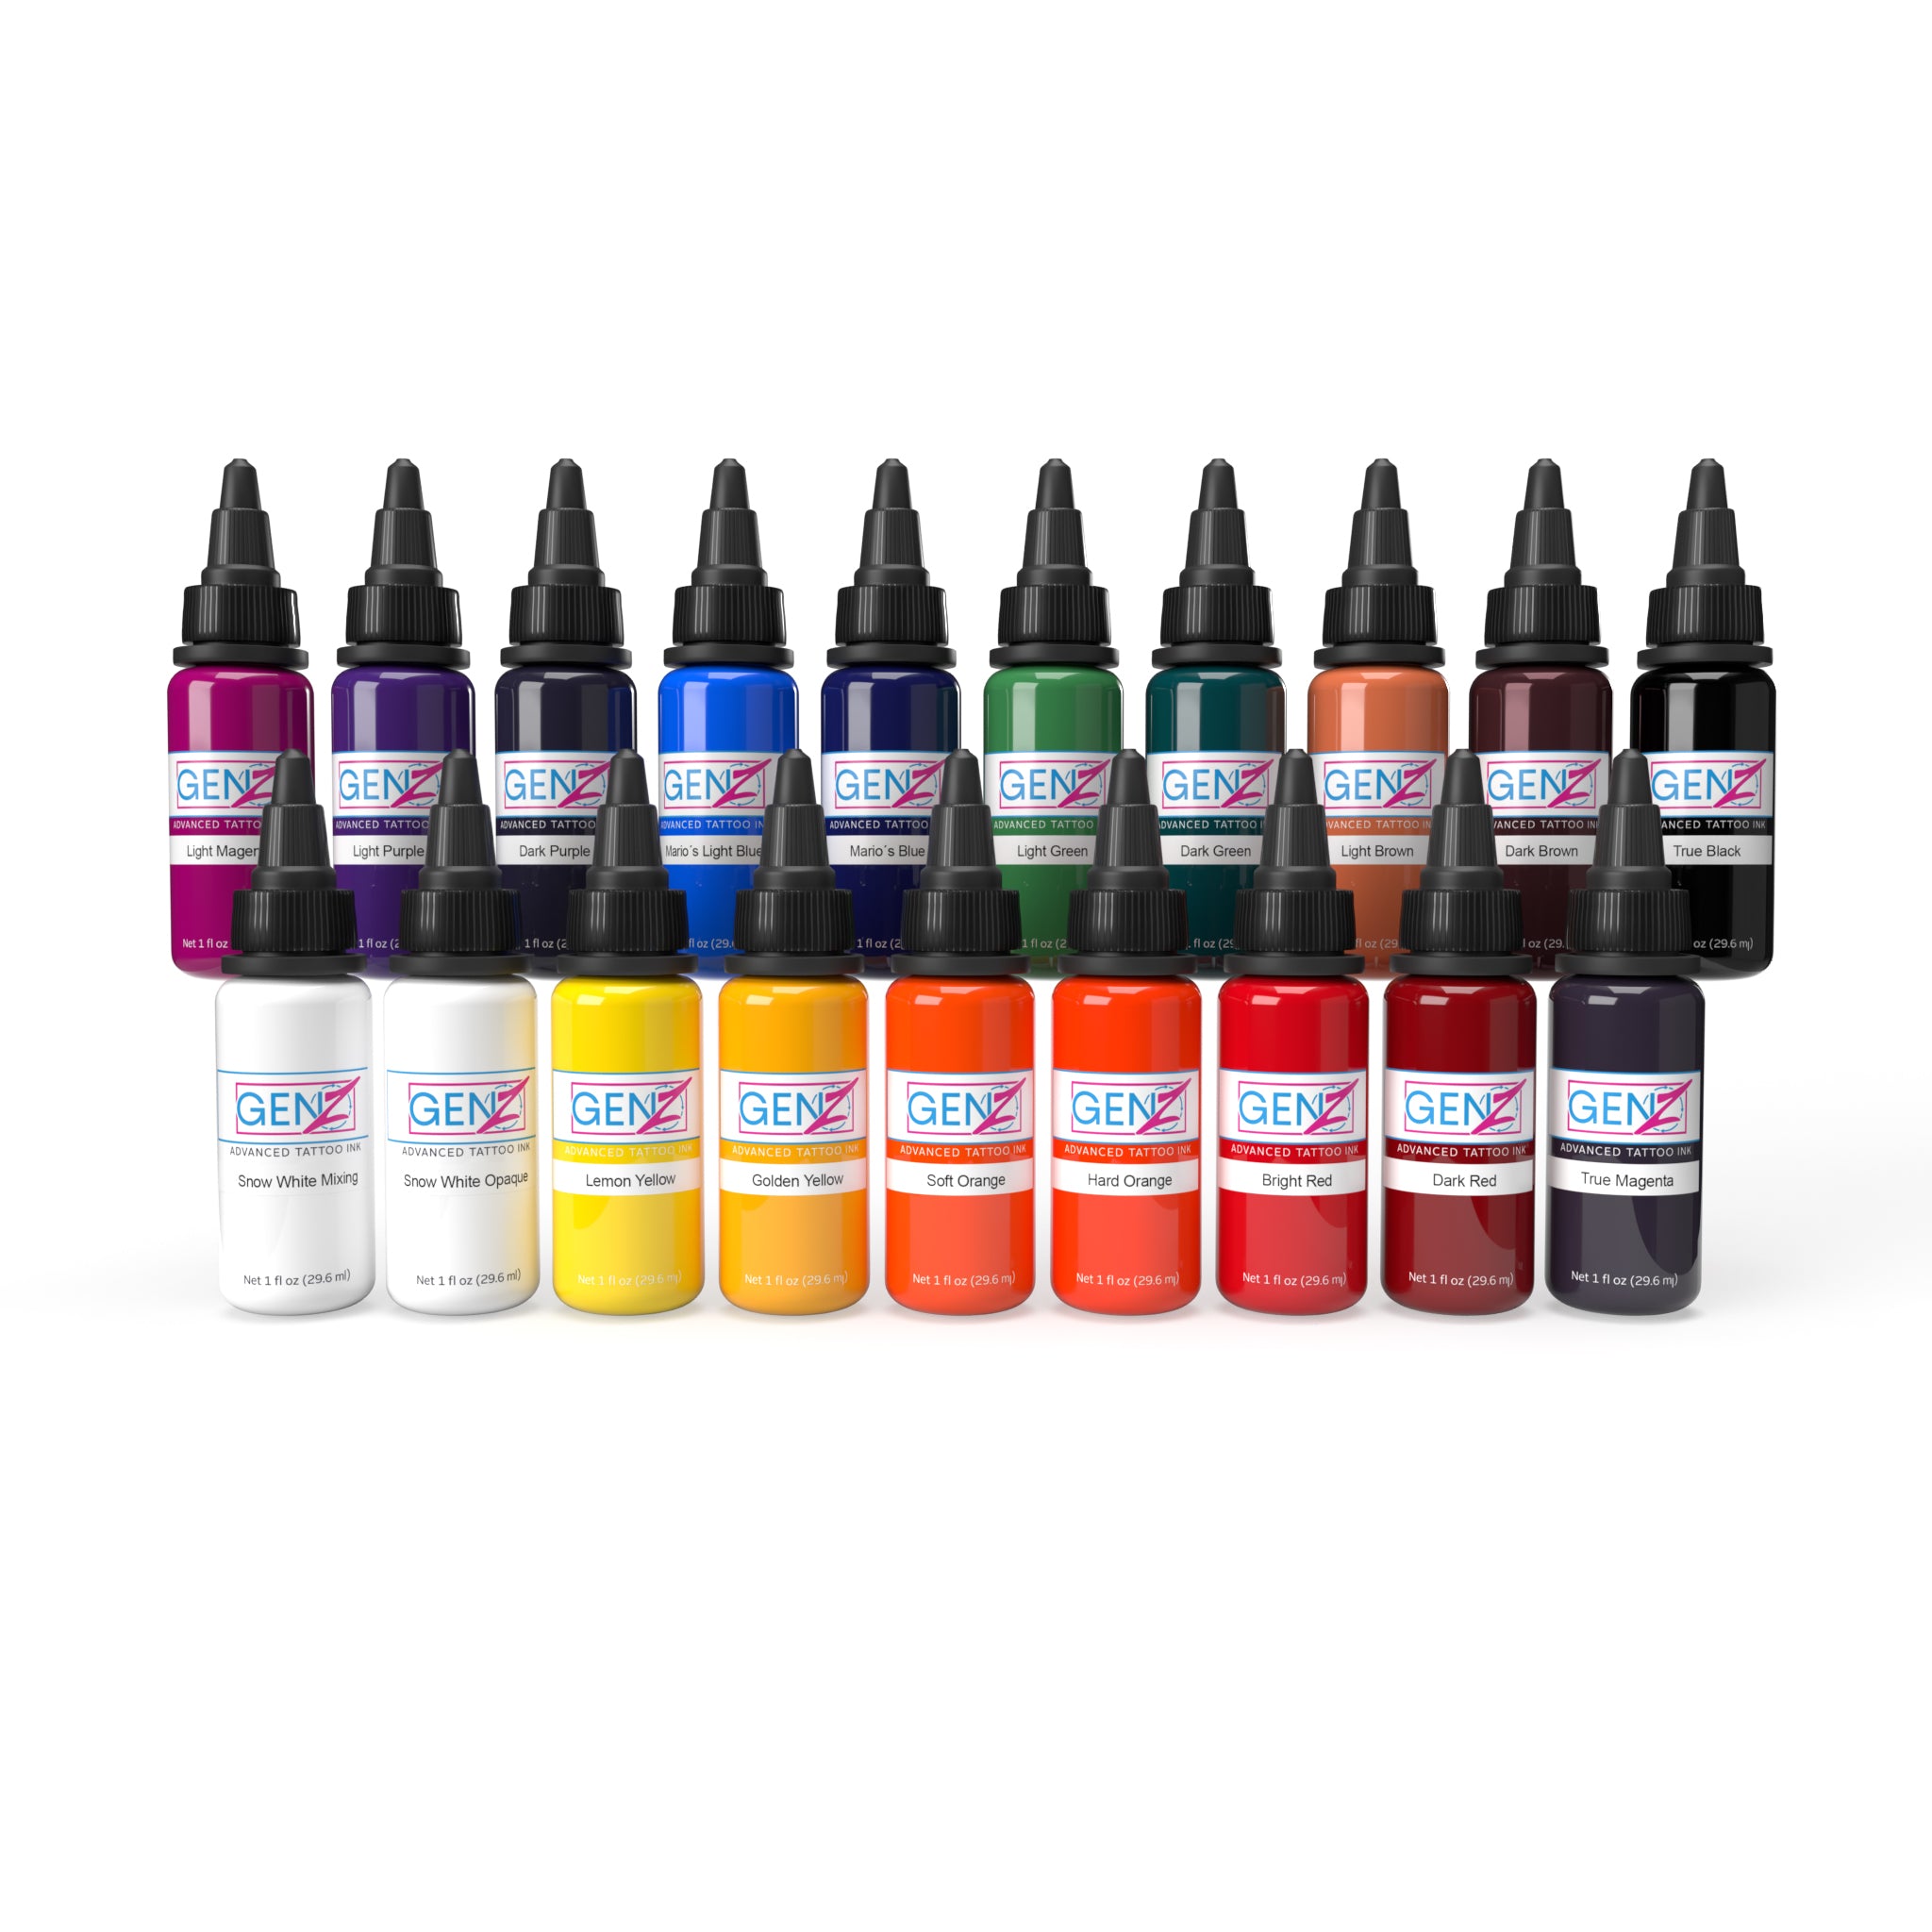 INTENZE Color Lining Ink Series - Intenze Tattoo Ink